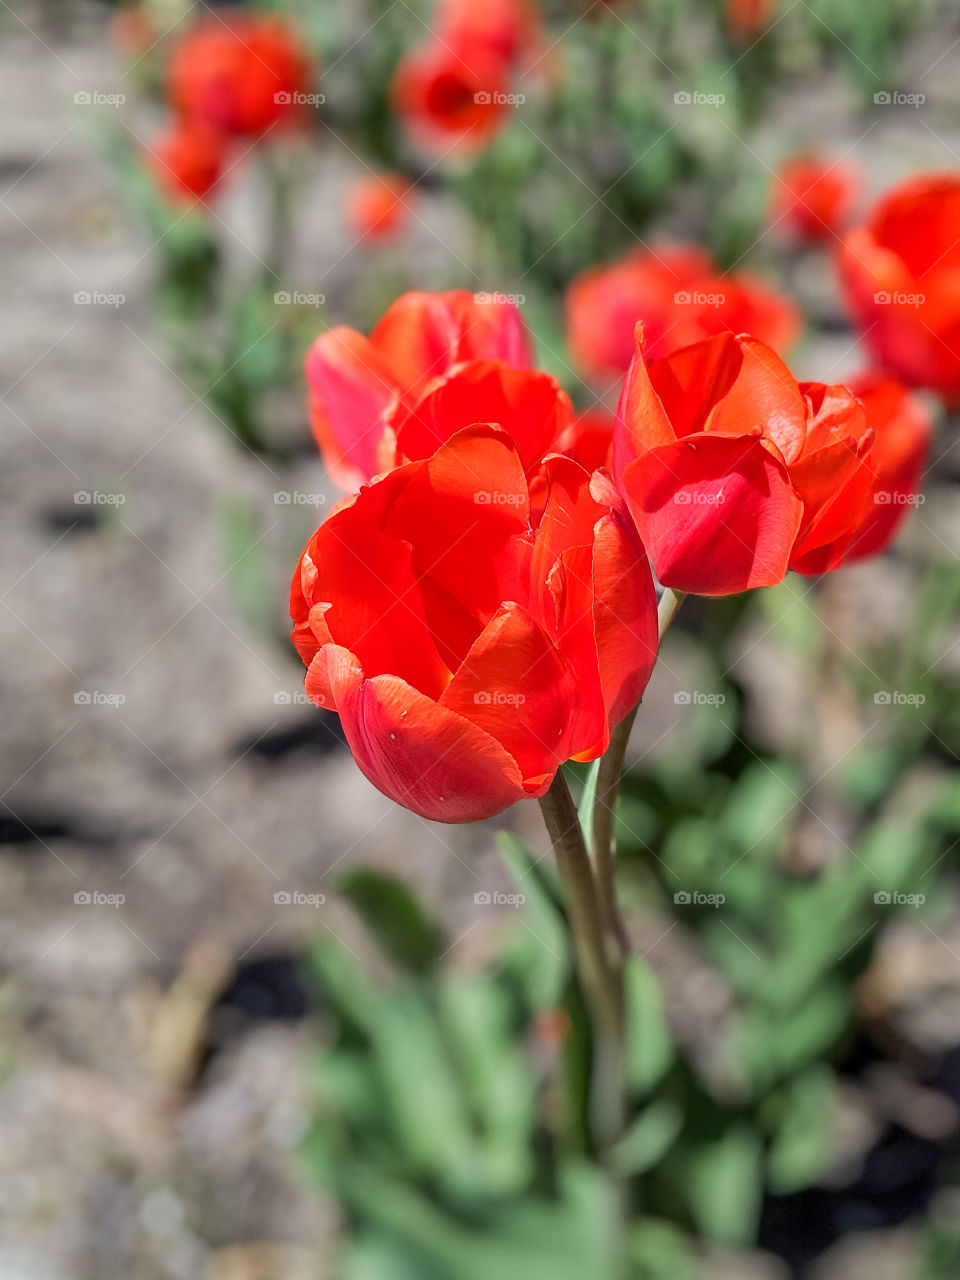 Vibrant Bright and Colorful Focused Red Tulips Cluster Bunch